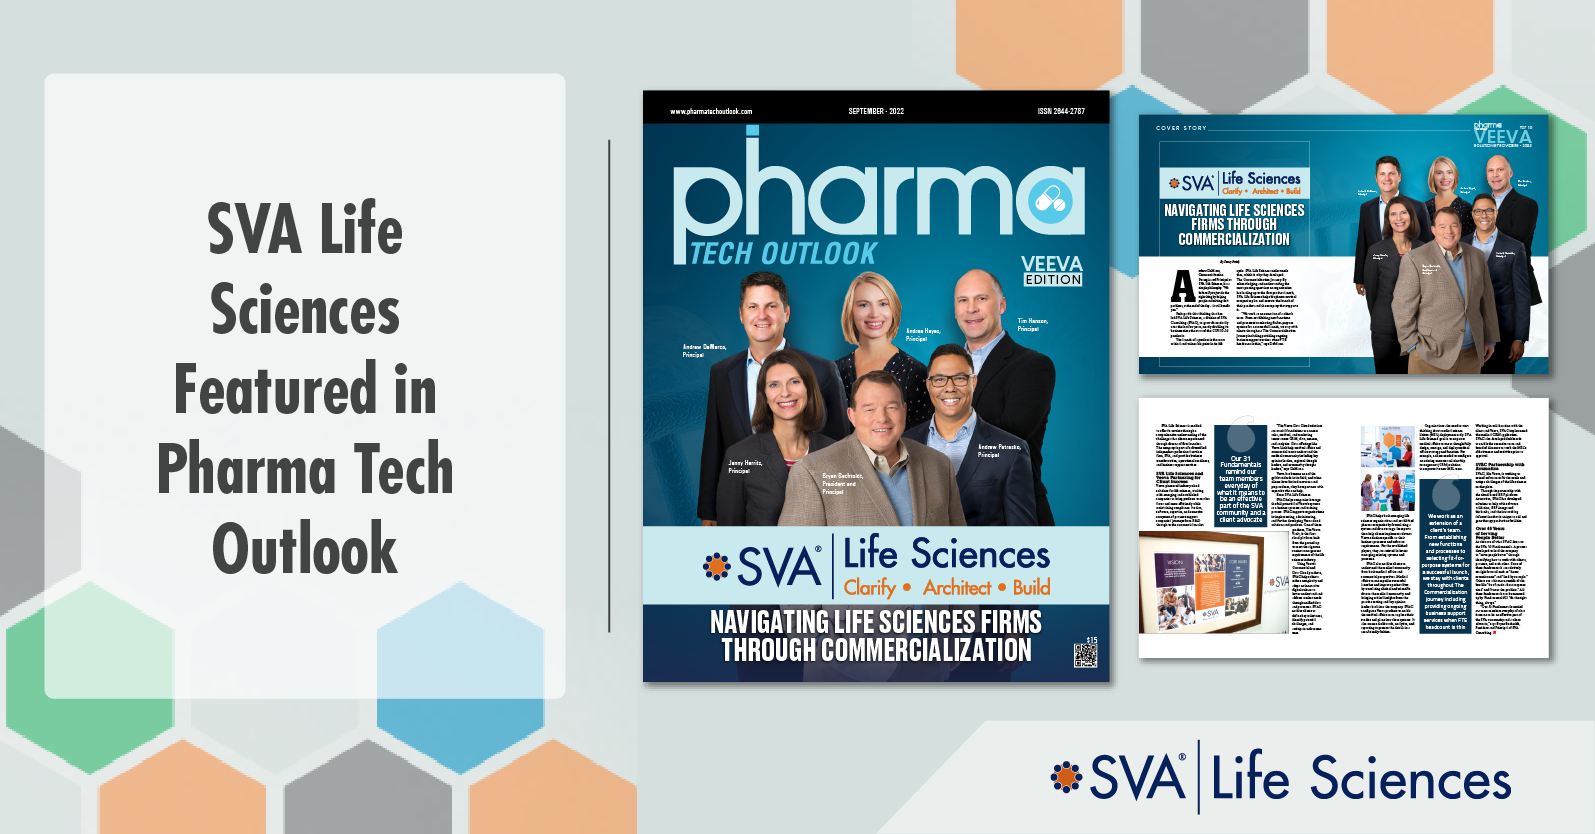 sva-life-sciences-featured-in-pharma-tech-outlook-2022-01